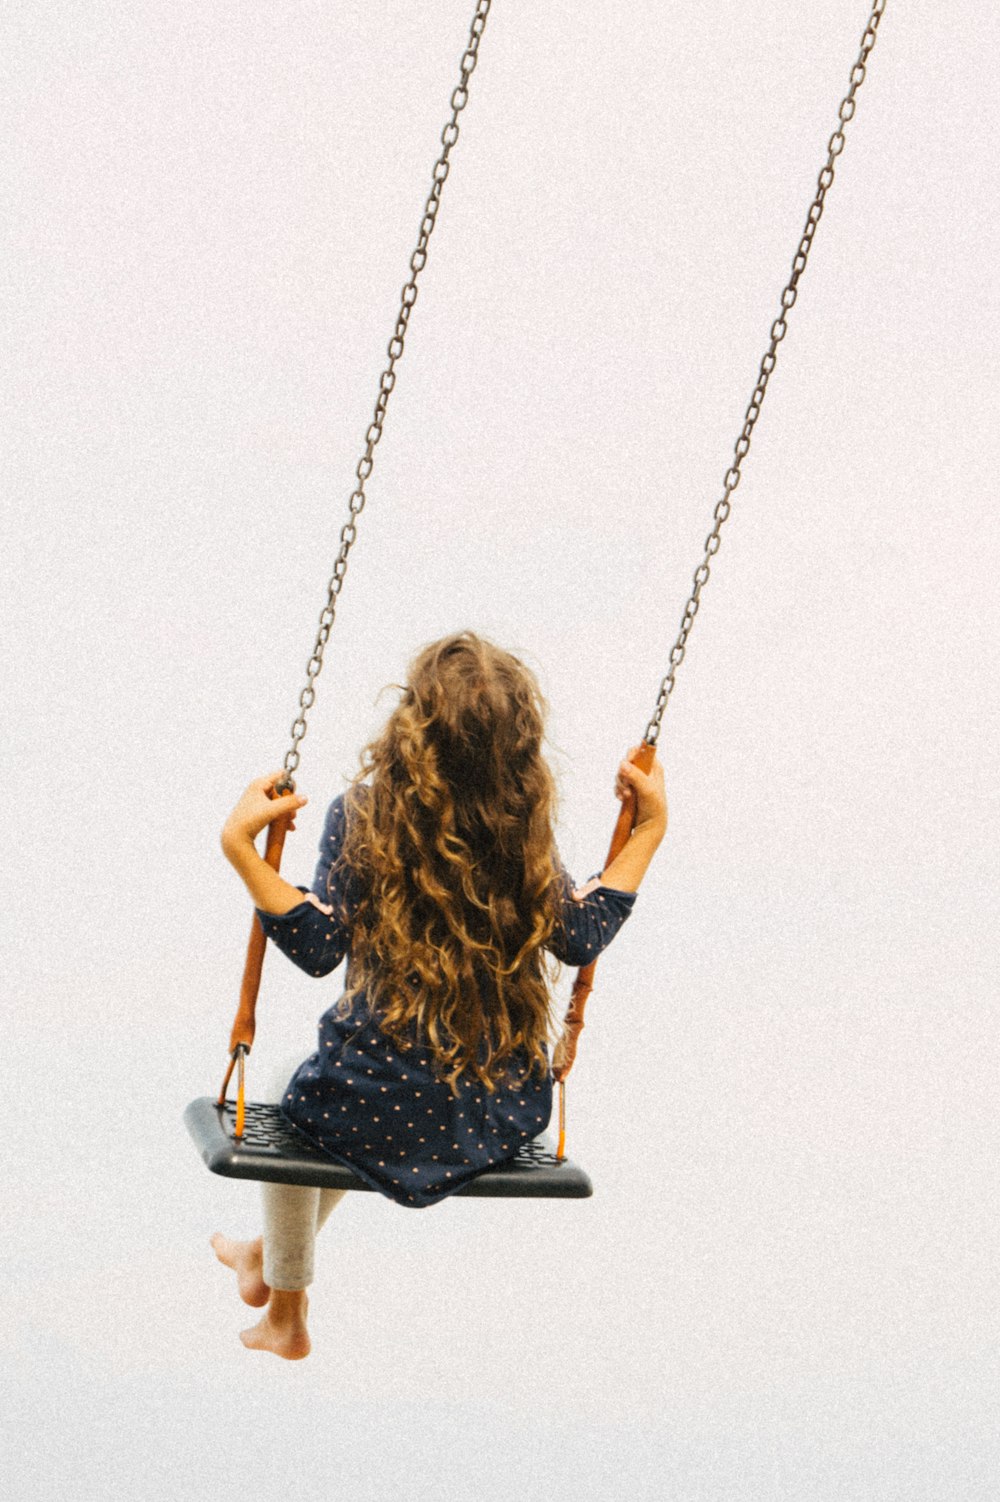 Girl On Swing Pictures | Download Free Images on Unsplash